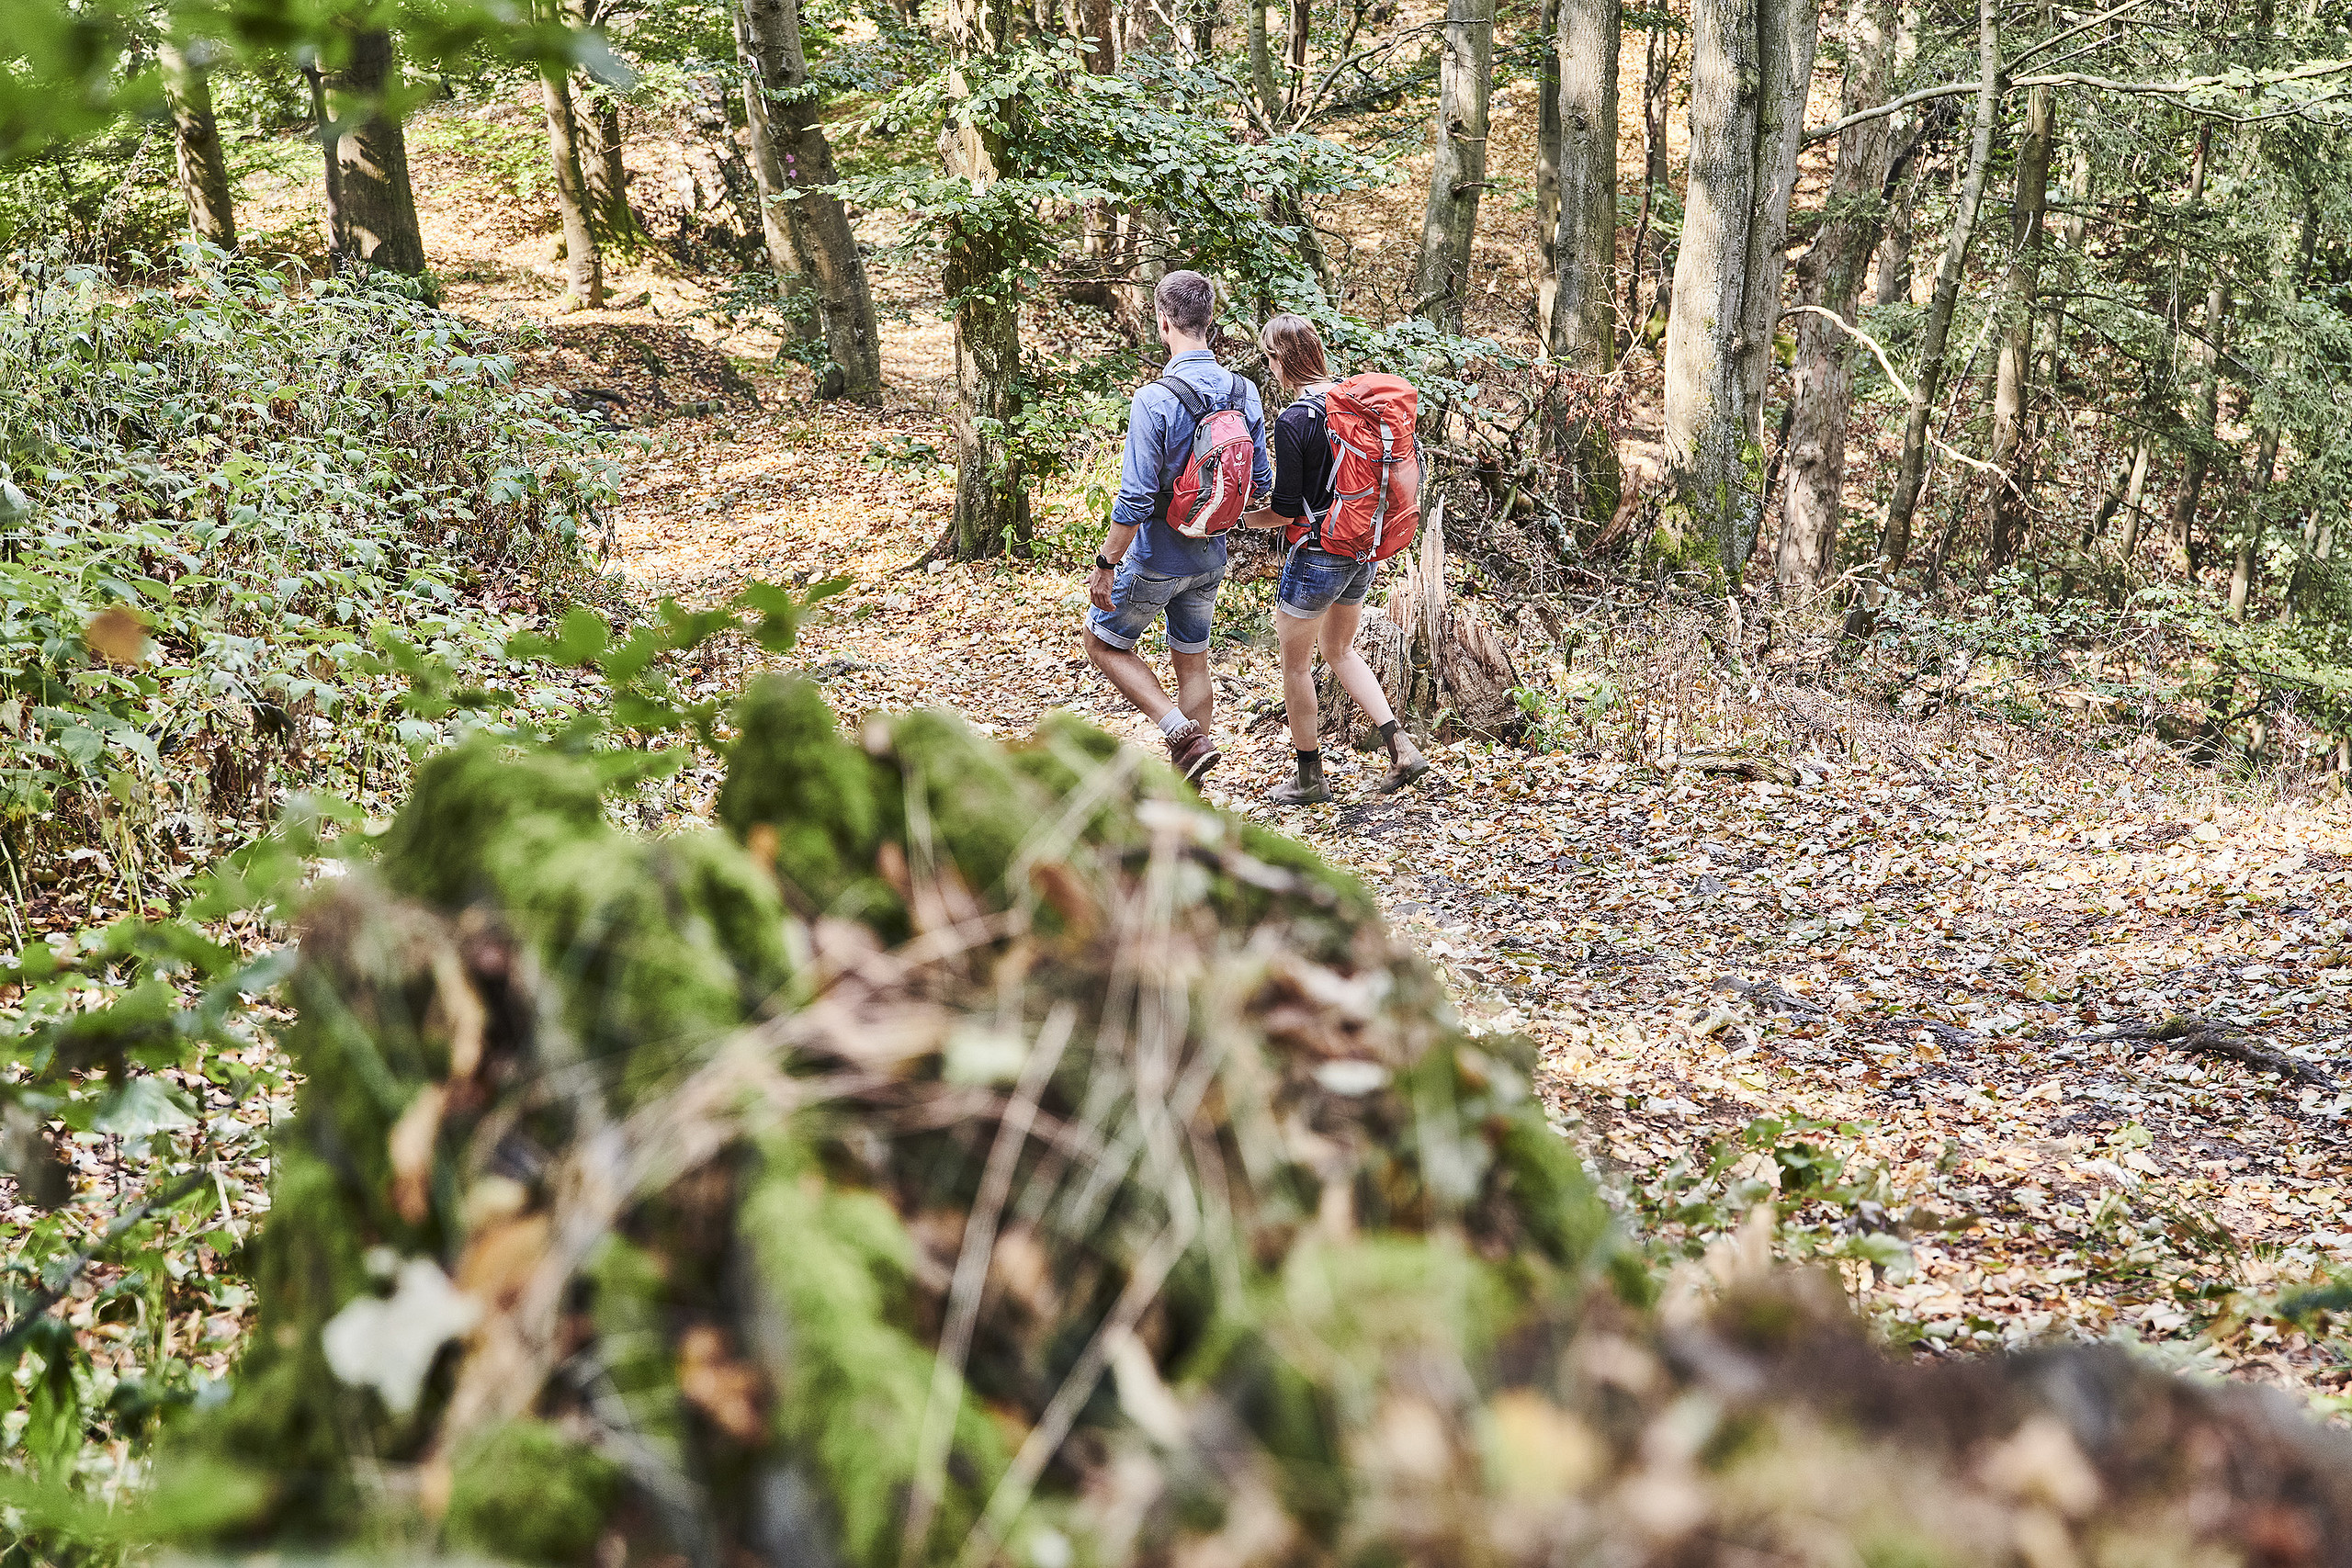 [Translate to English:] Hikers walking through the forest